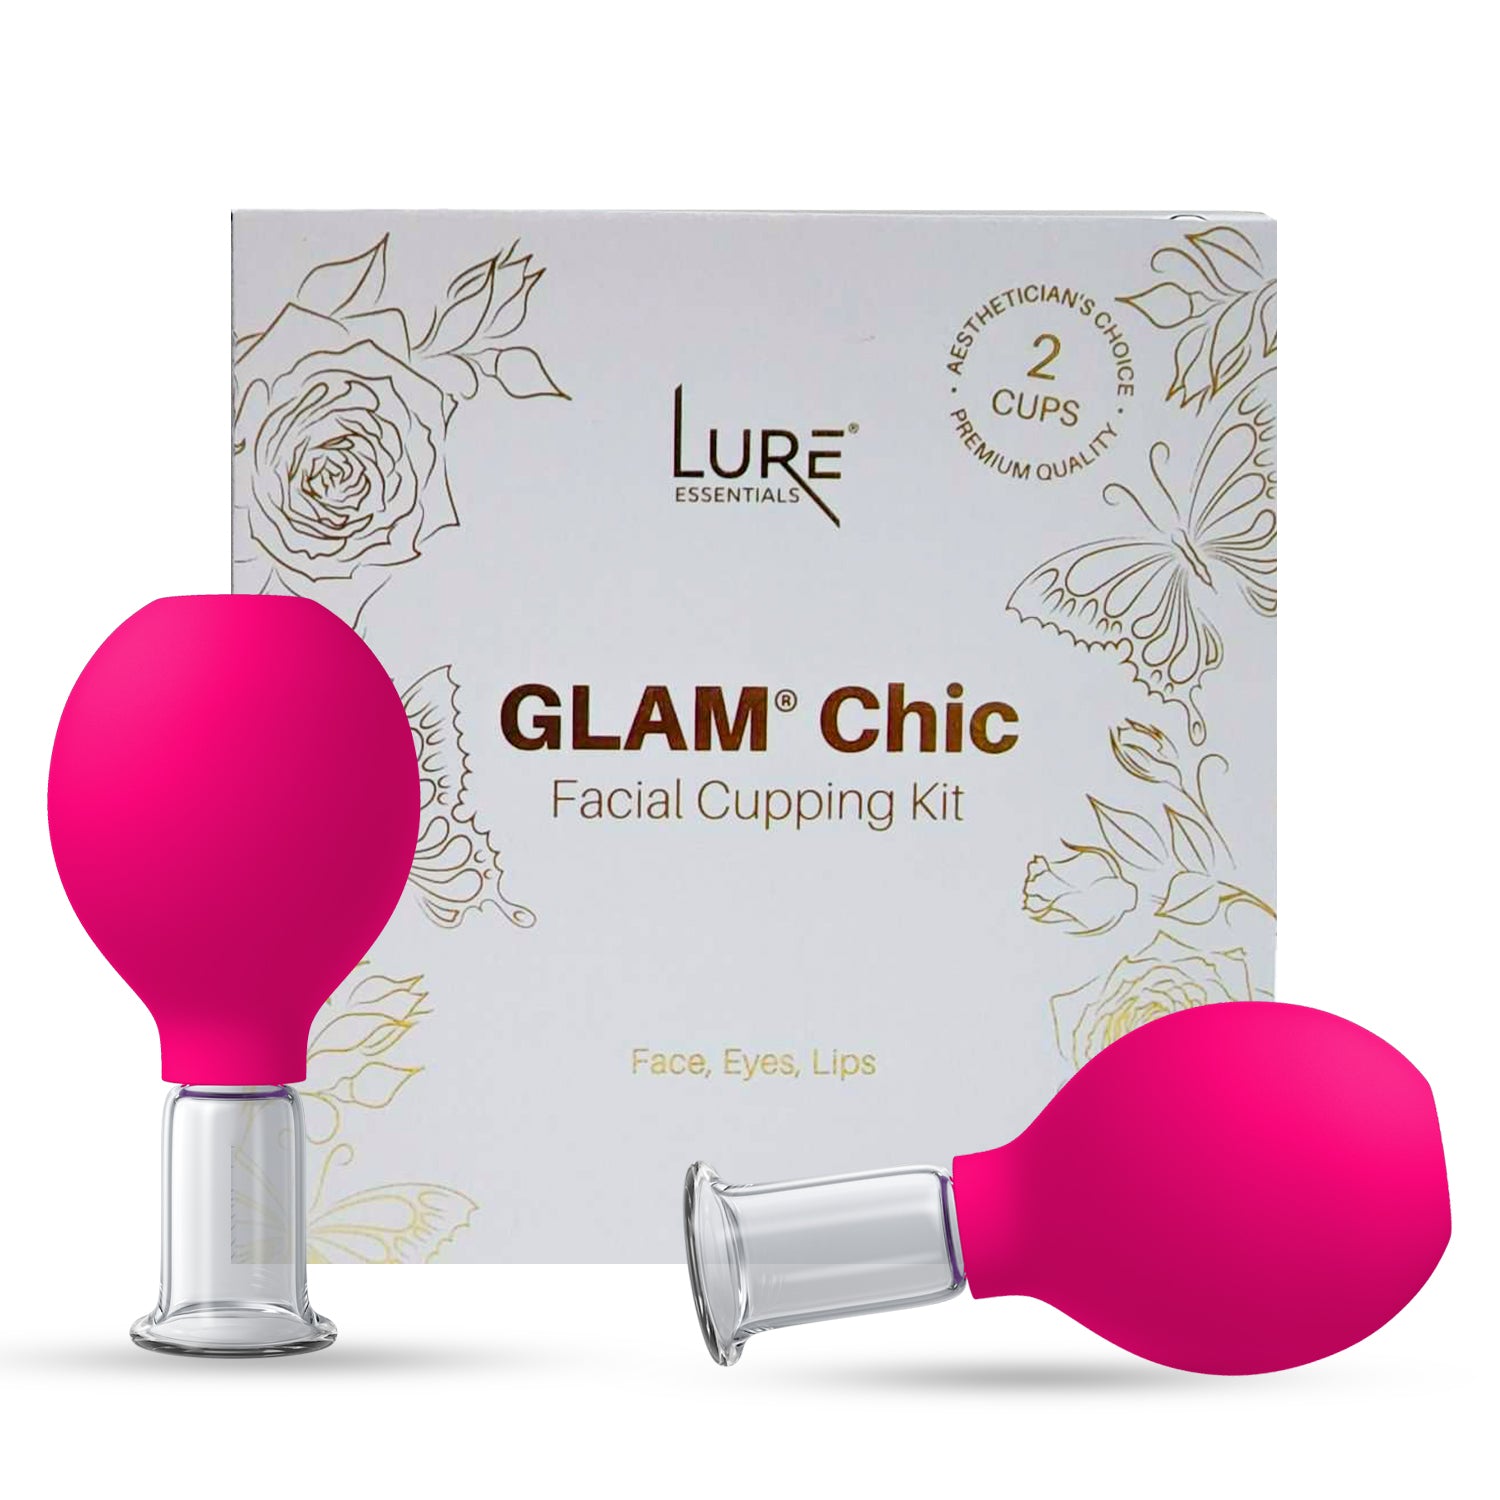 NEW! Glam Chic Face & Eyes Cupping Set - PINK